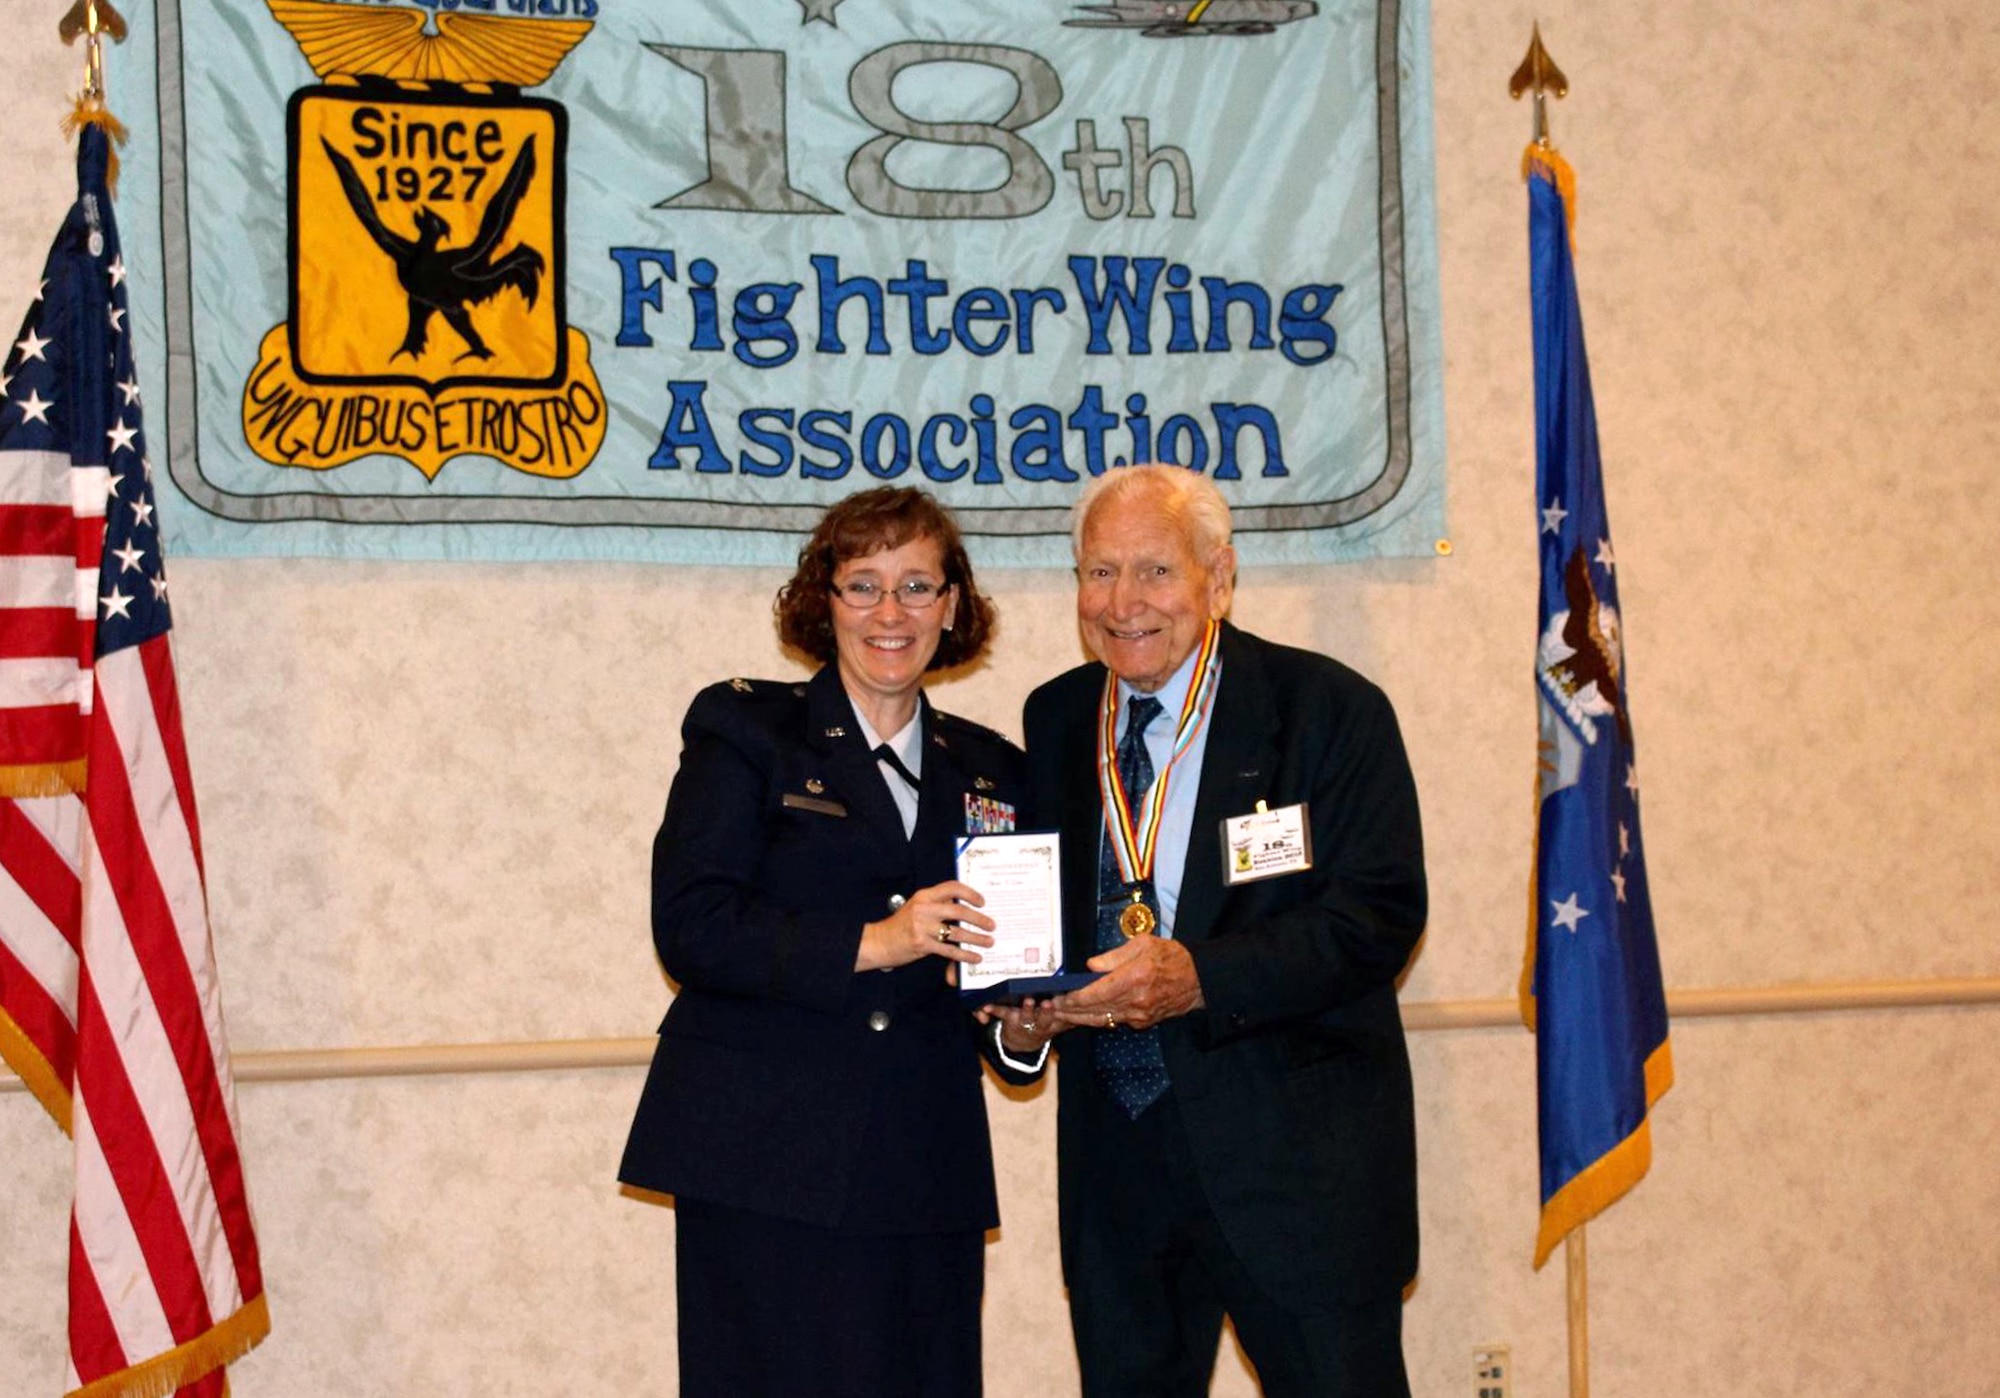 Col. Lisa Craig, 433rd Mission Support Group commander, presents Col. (ret) Julian Crowe with the Republic of Korea Ambassador for Peace Medal Oct. 24 during the 18th Fighter Bomber Wing Association dinner at the Double Tree Hotel San Antonio, Texas. Col. Crow was the commander of the 67th Fighter Bomber Squadron and flew 101 missions in Korea and served twenty-five years in the United States Air Force. (Photo by Susan Kee) (released)